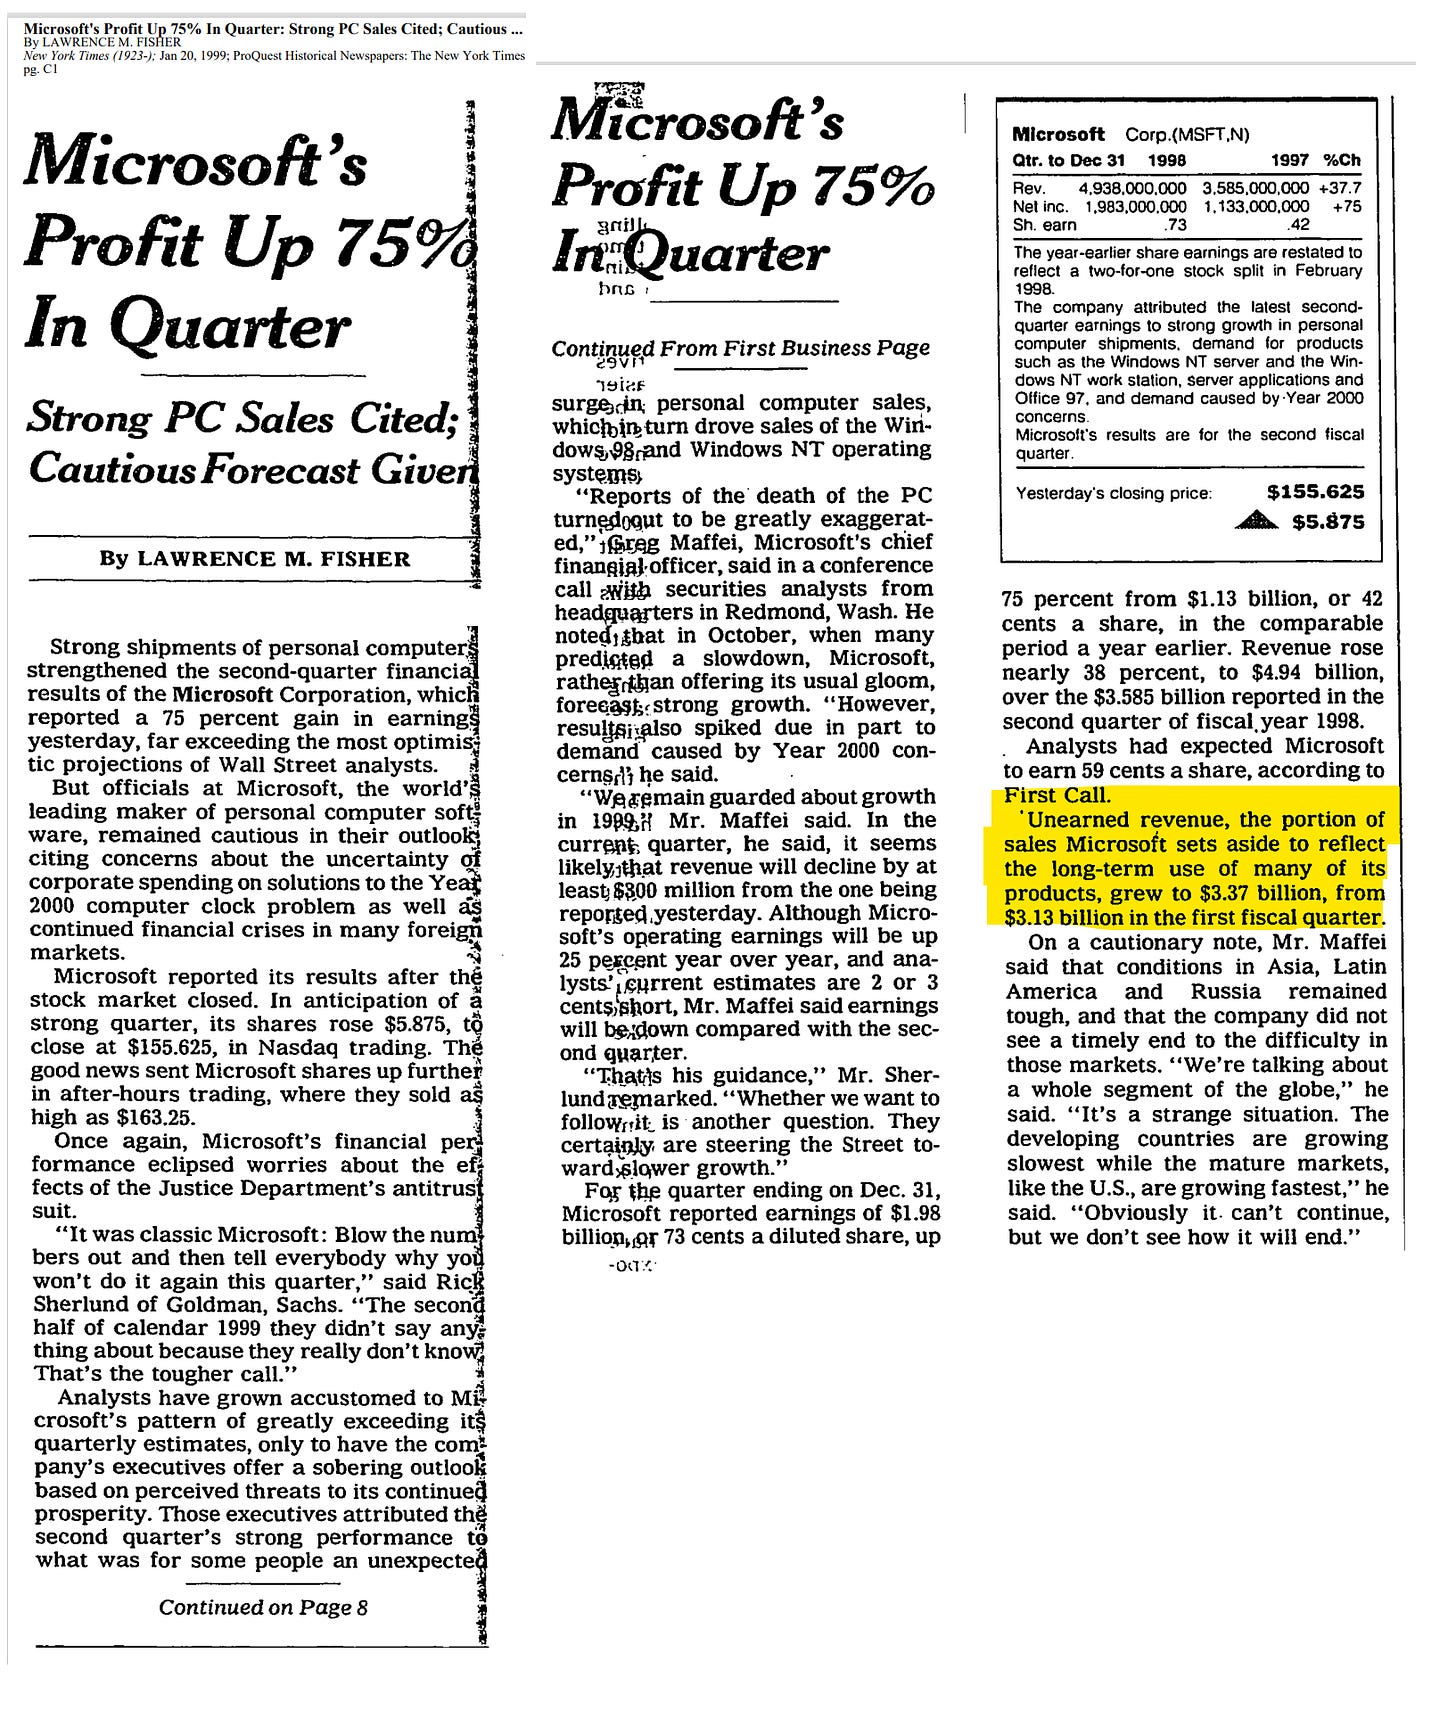 Microsoft's Profit Up 75% In Quarter reads the headline. Highlighted by author is "Unearned revenue, the portion of sales microsoft sets aside to reflect long-term use of many of its products grew to $3.37 billion, from 3.13 billion in the first quarter"